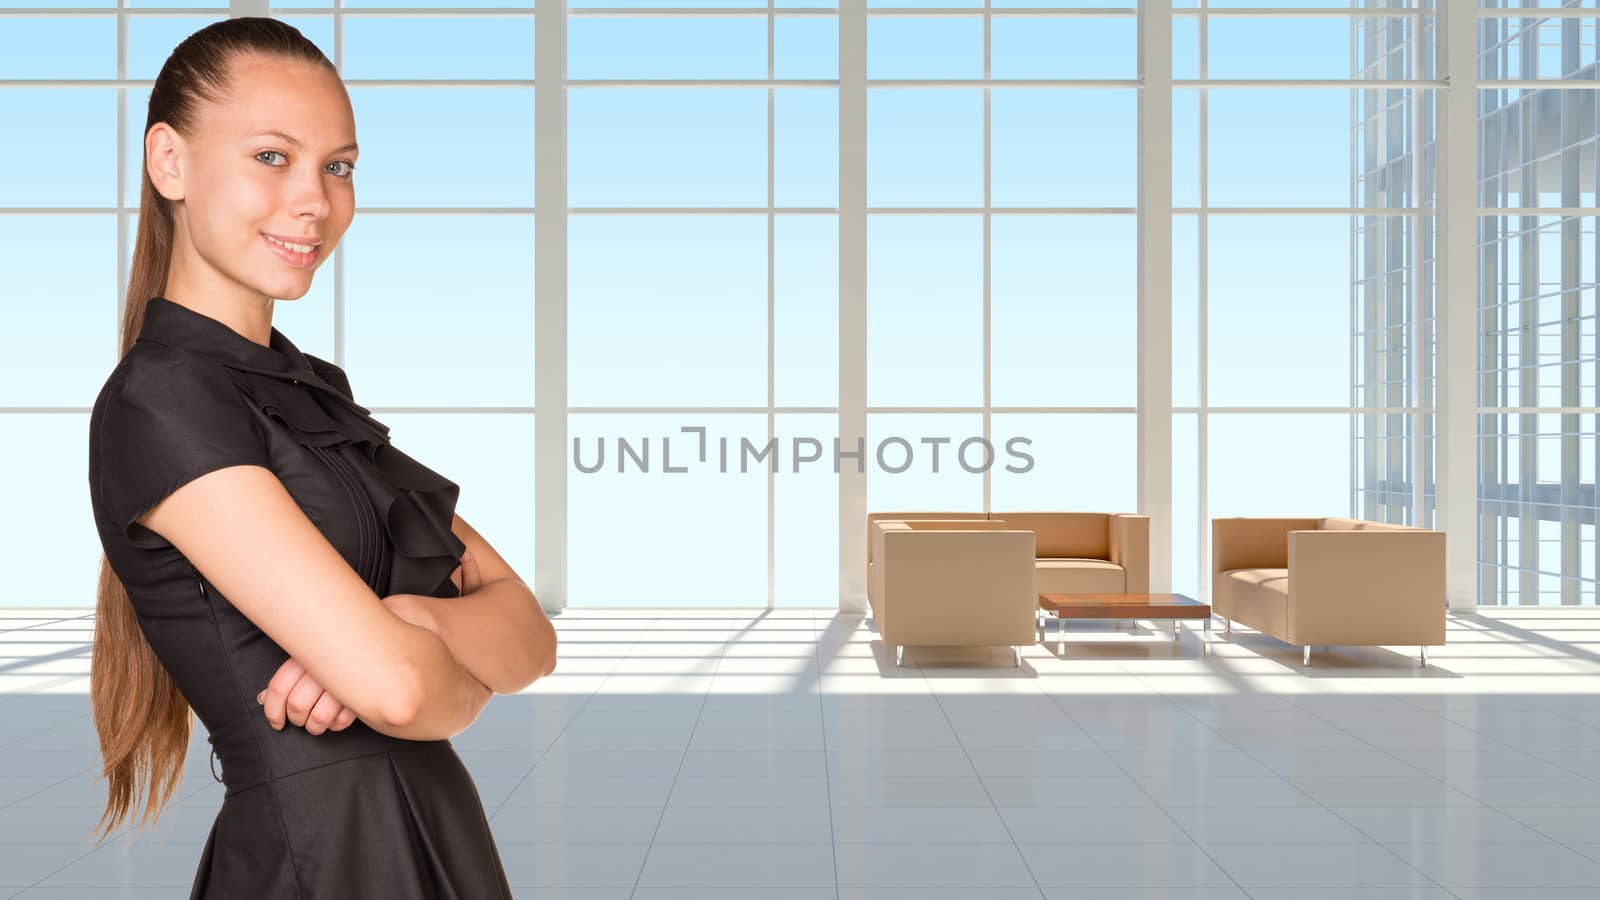 Businesswoman in dress smiling and looking at camera. Large window in office building as background